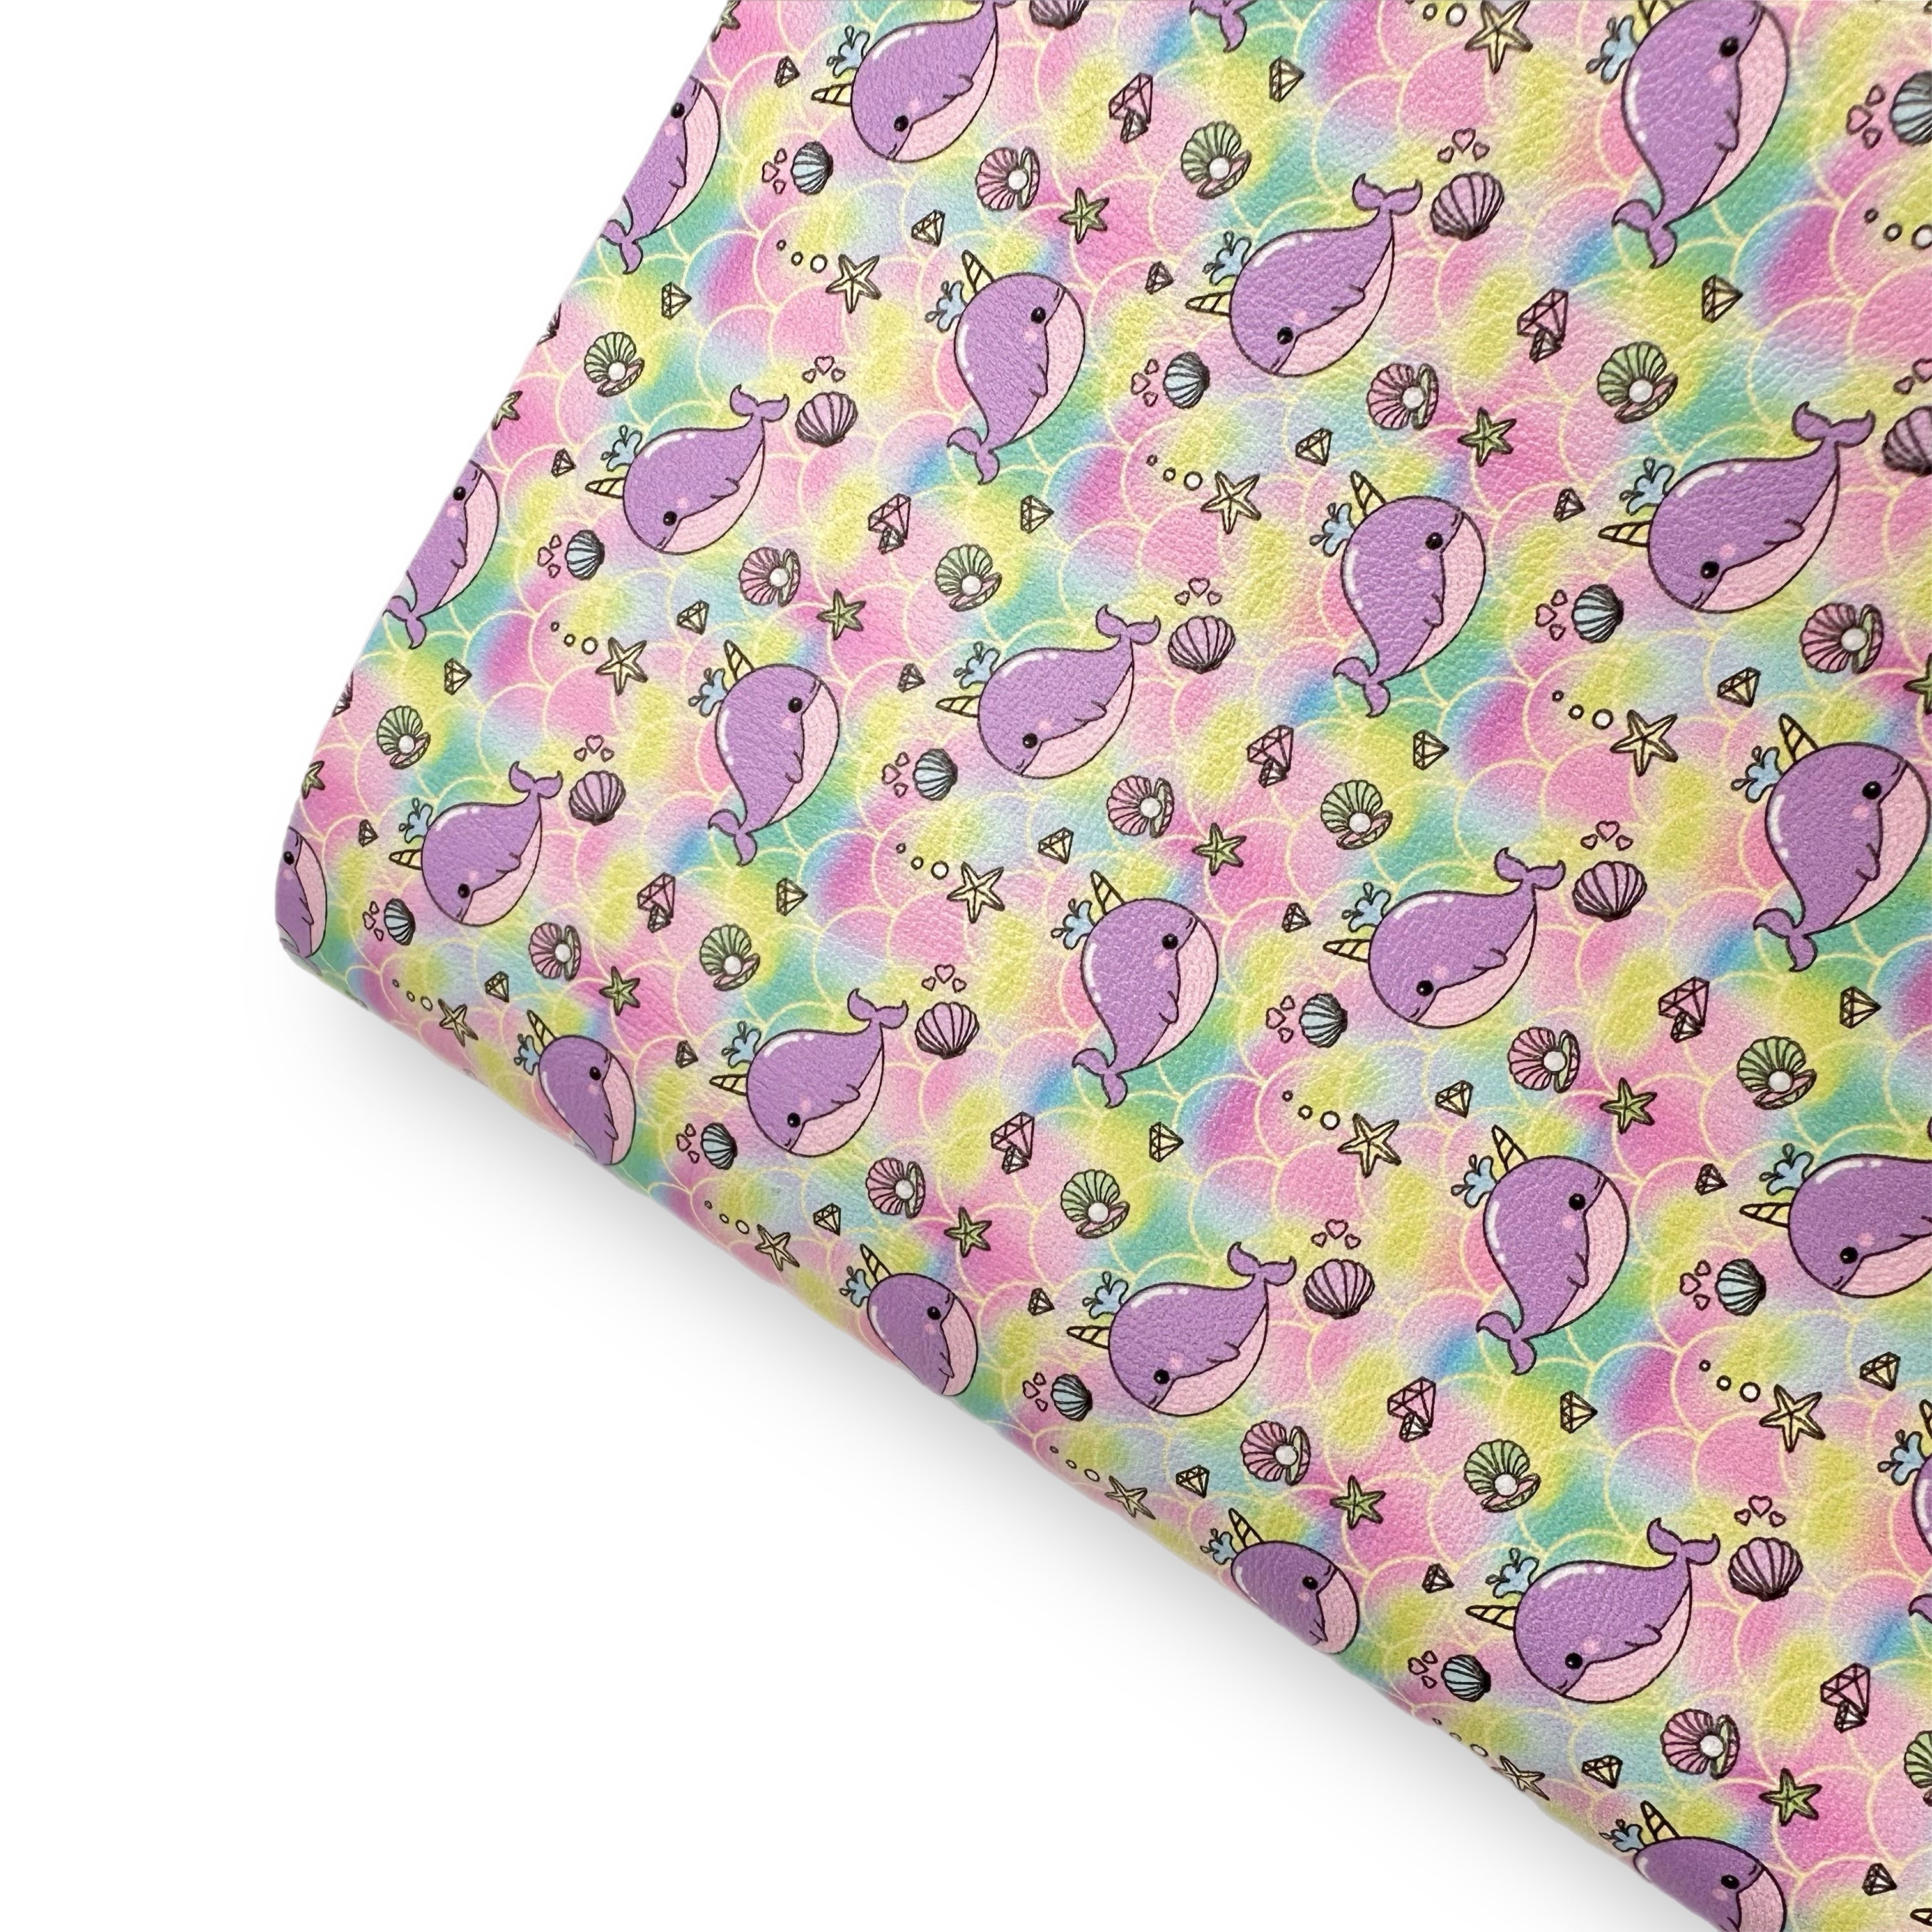 Pastel Narwhal Scales Premium Faux Leather Fabric